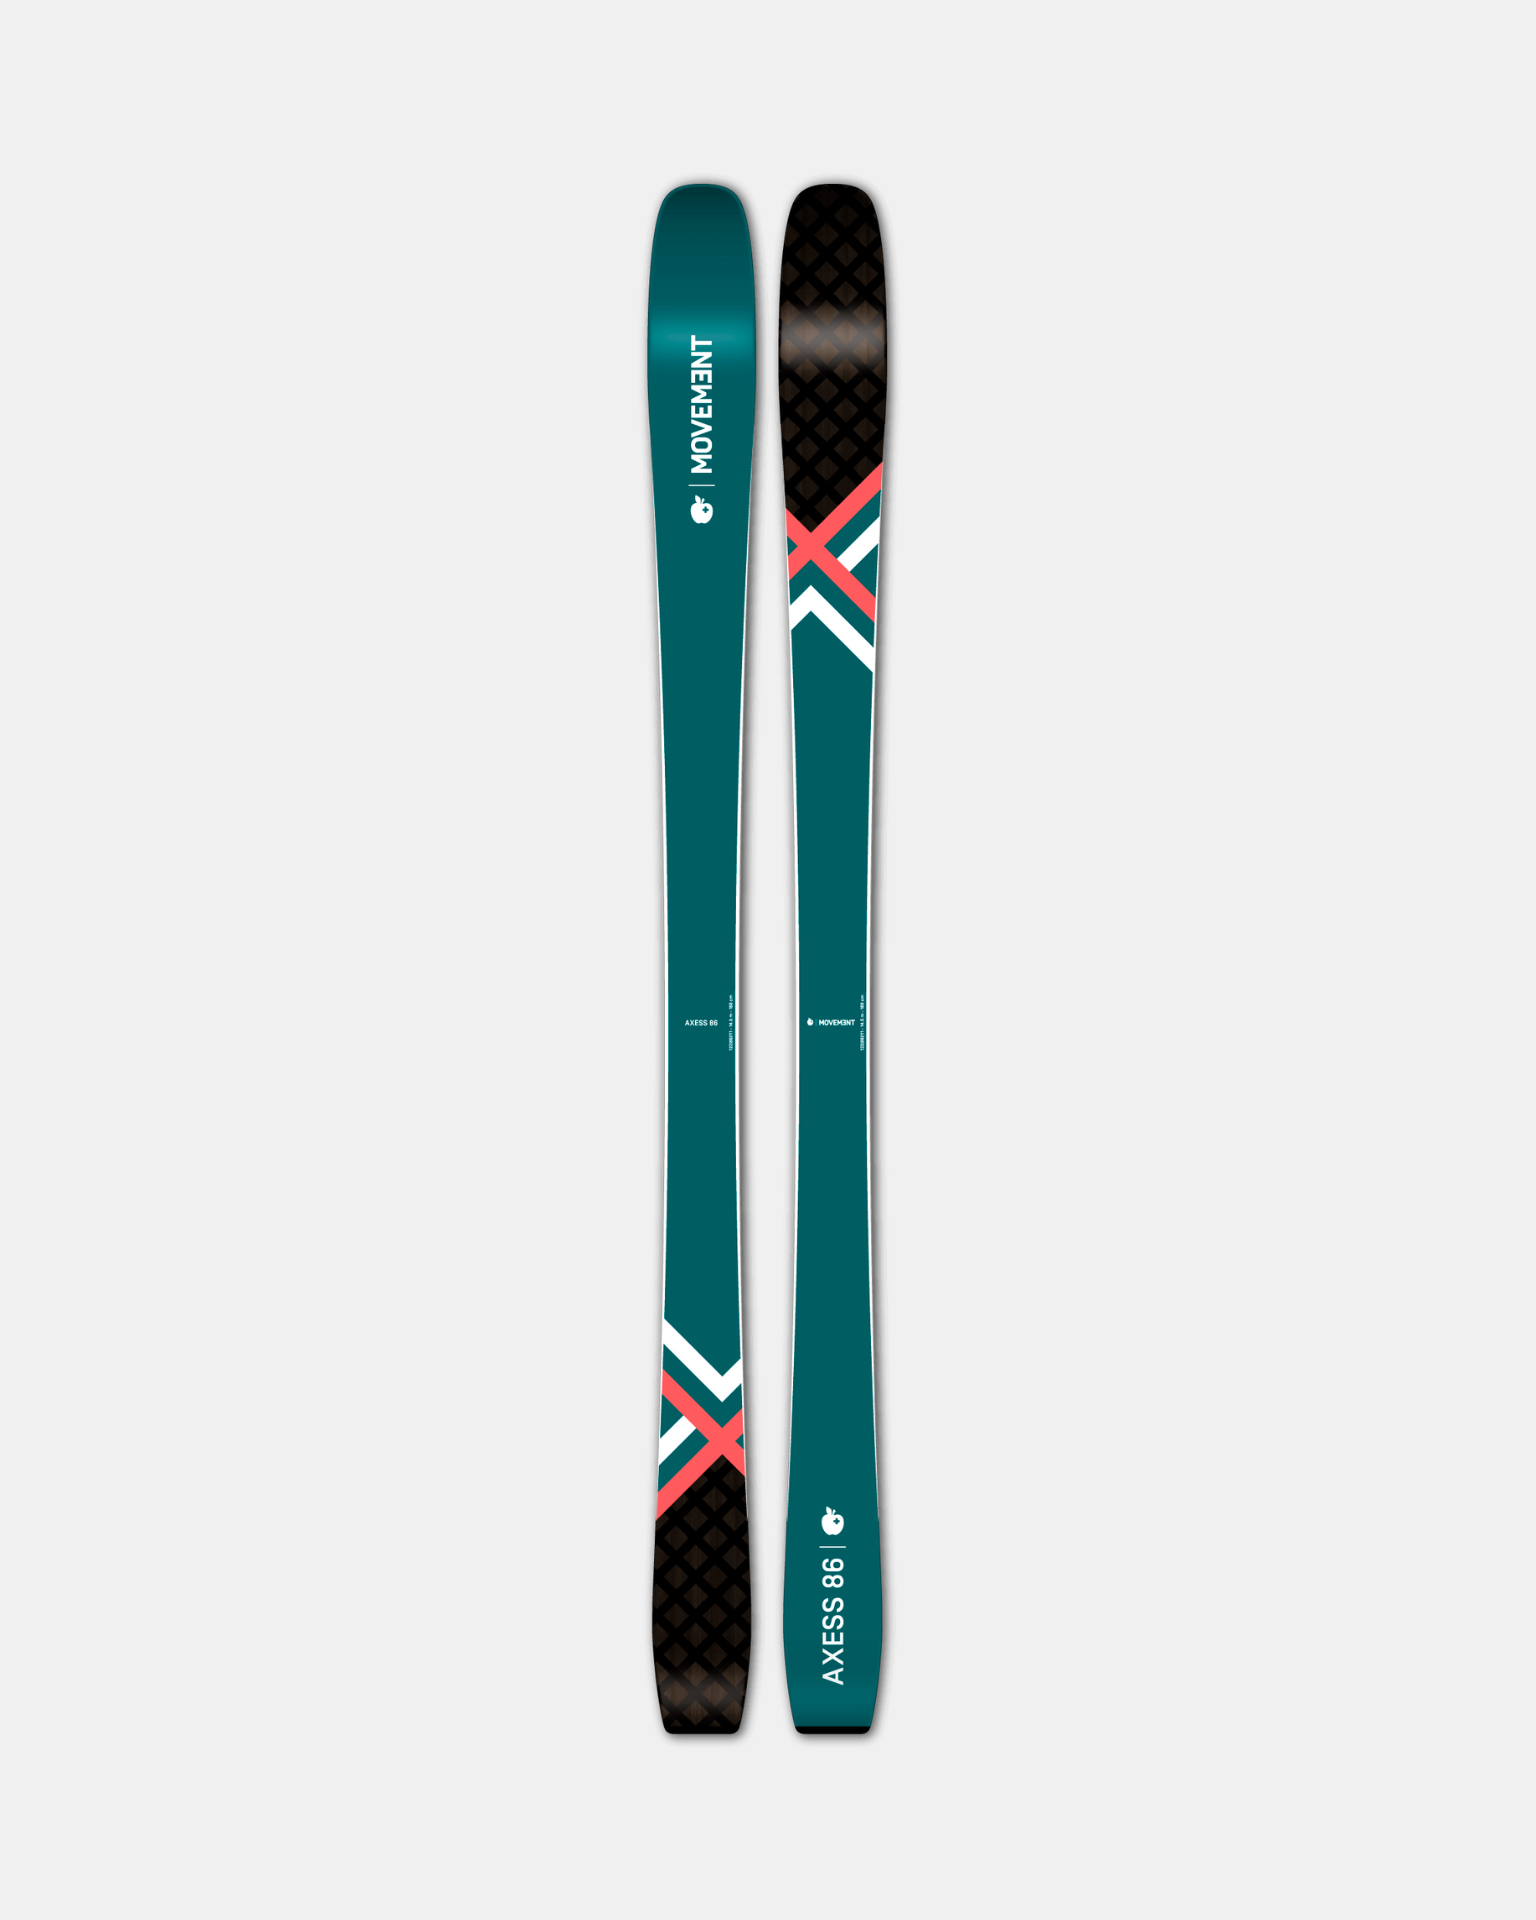 Navigate varying conditions with Movement's Axess 86 Women's all-terrain skis.